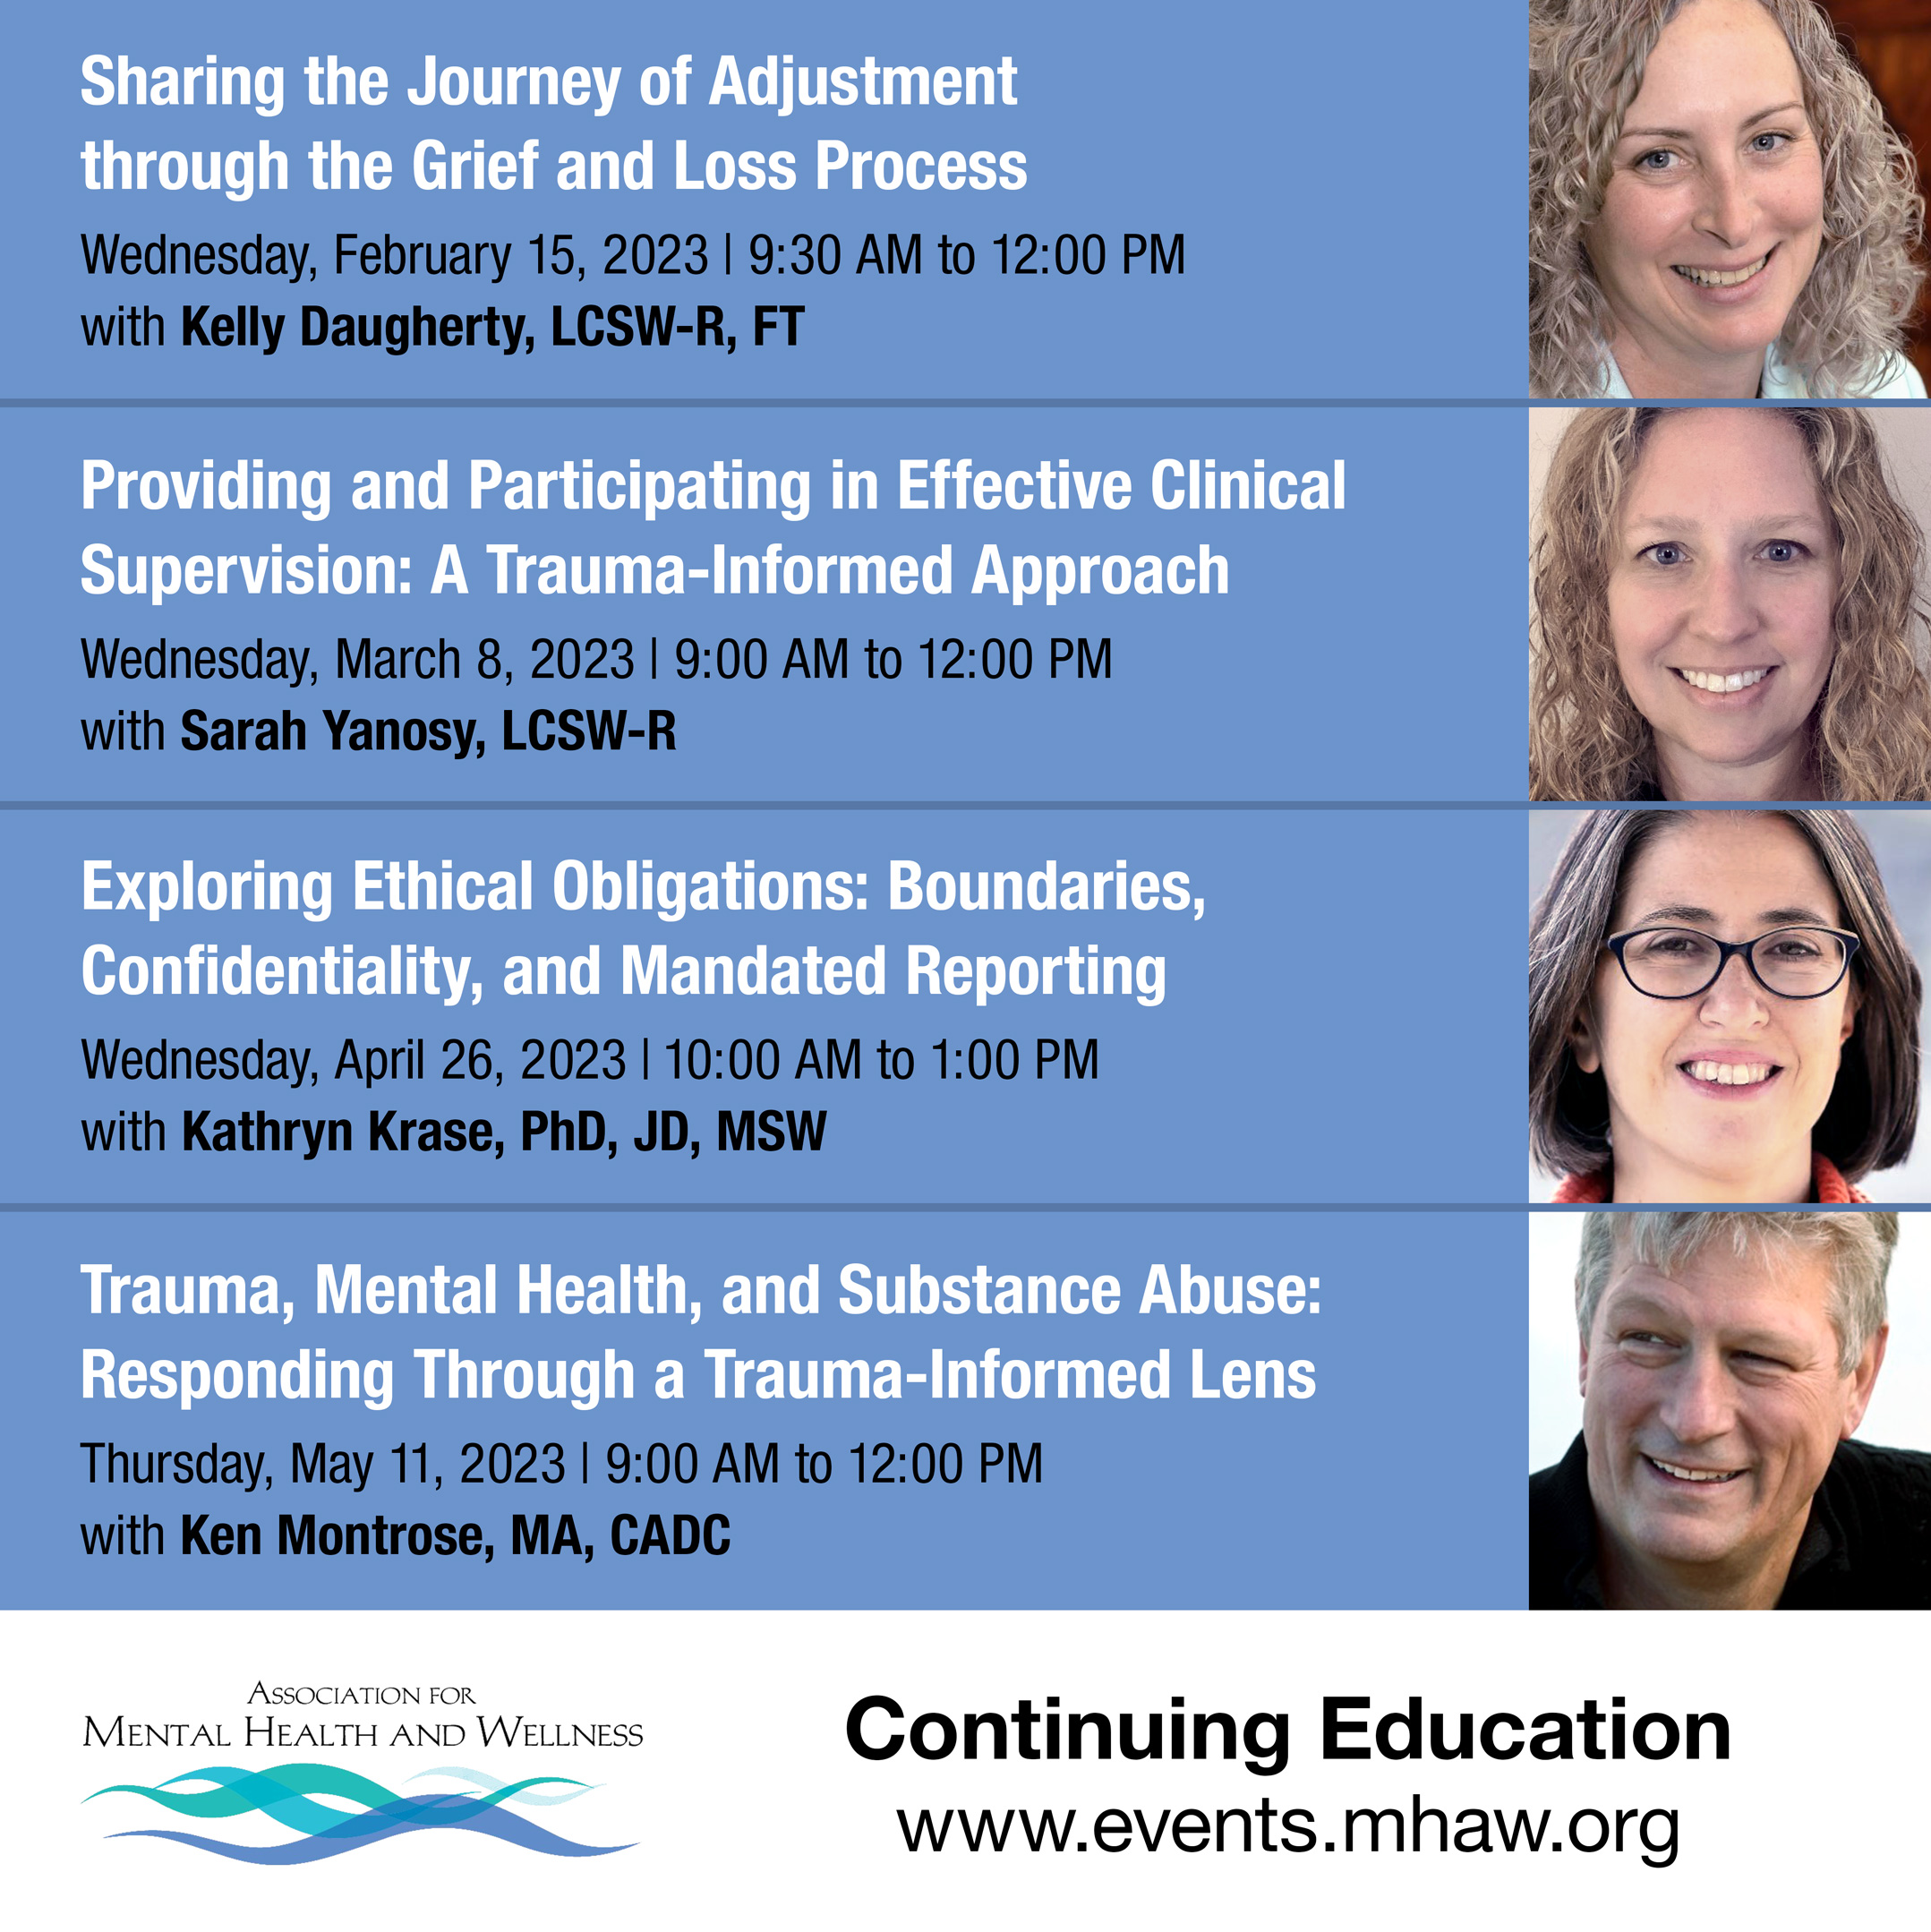 Social media image and display ad in square format for workshops by the Association for Mental Health and Wellness on grief, clinical supervision, confidentiality, trauma, and substance abuse. The background is blue grey; the text is black and white. There are headshots of the four speakers: Kelly Daugherty, LCSW-R, FT; Sarah Yanosy, LCSW-R; Kathryn Krase, PhD, JD, MSW; and Ken Montrose, CADC.